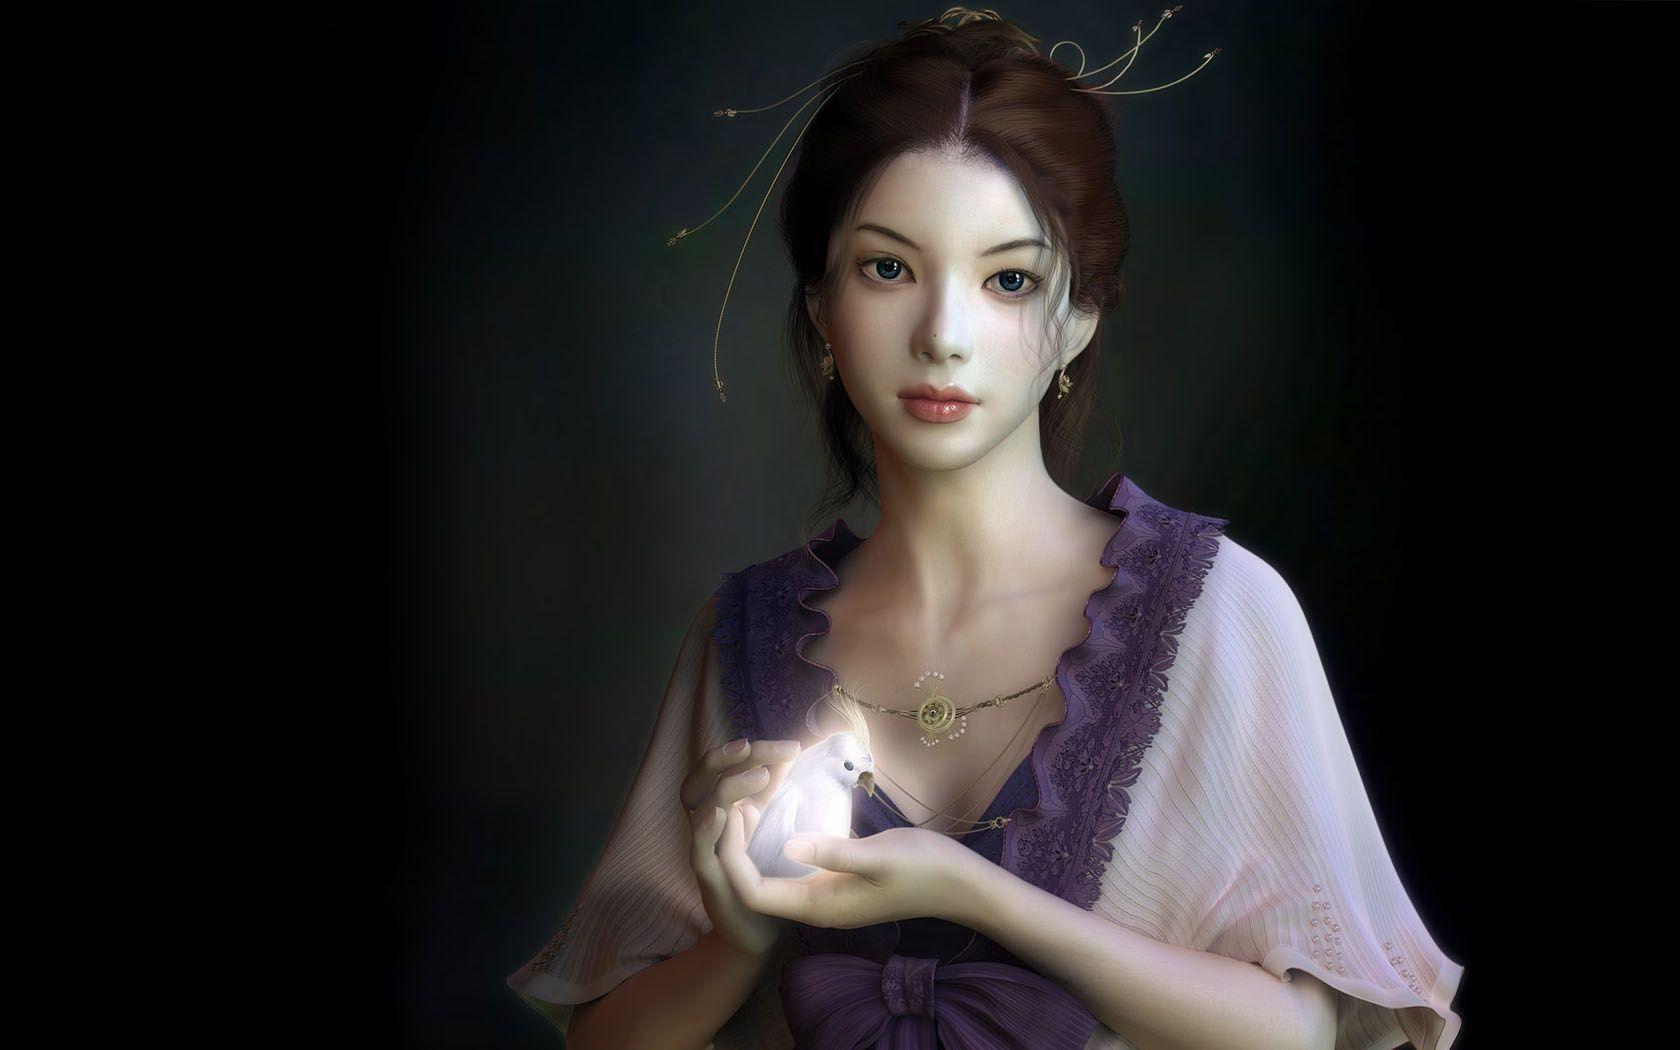 The princess of the Fantasy world wallpaper and image